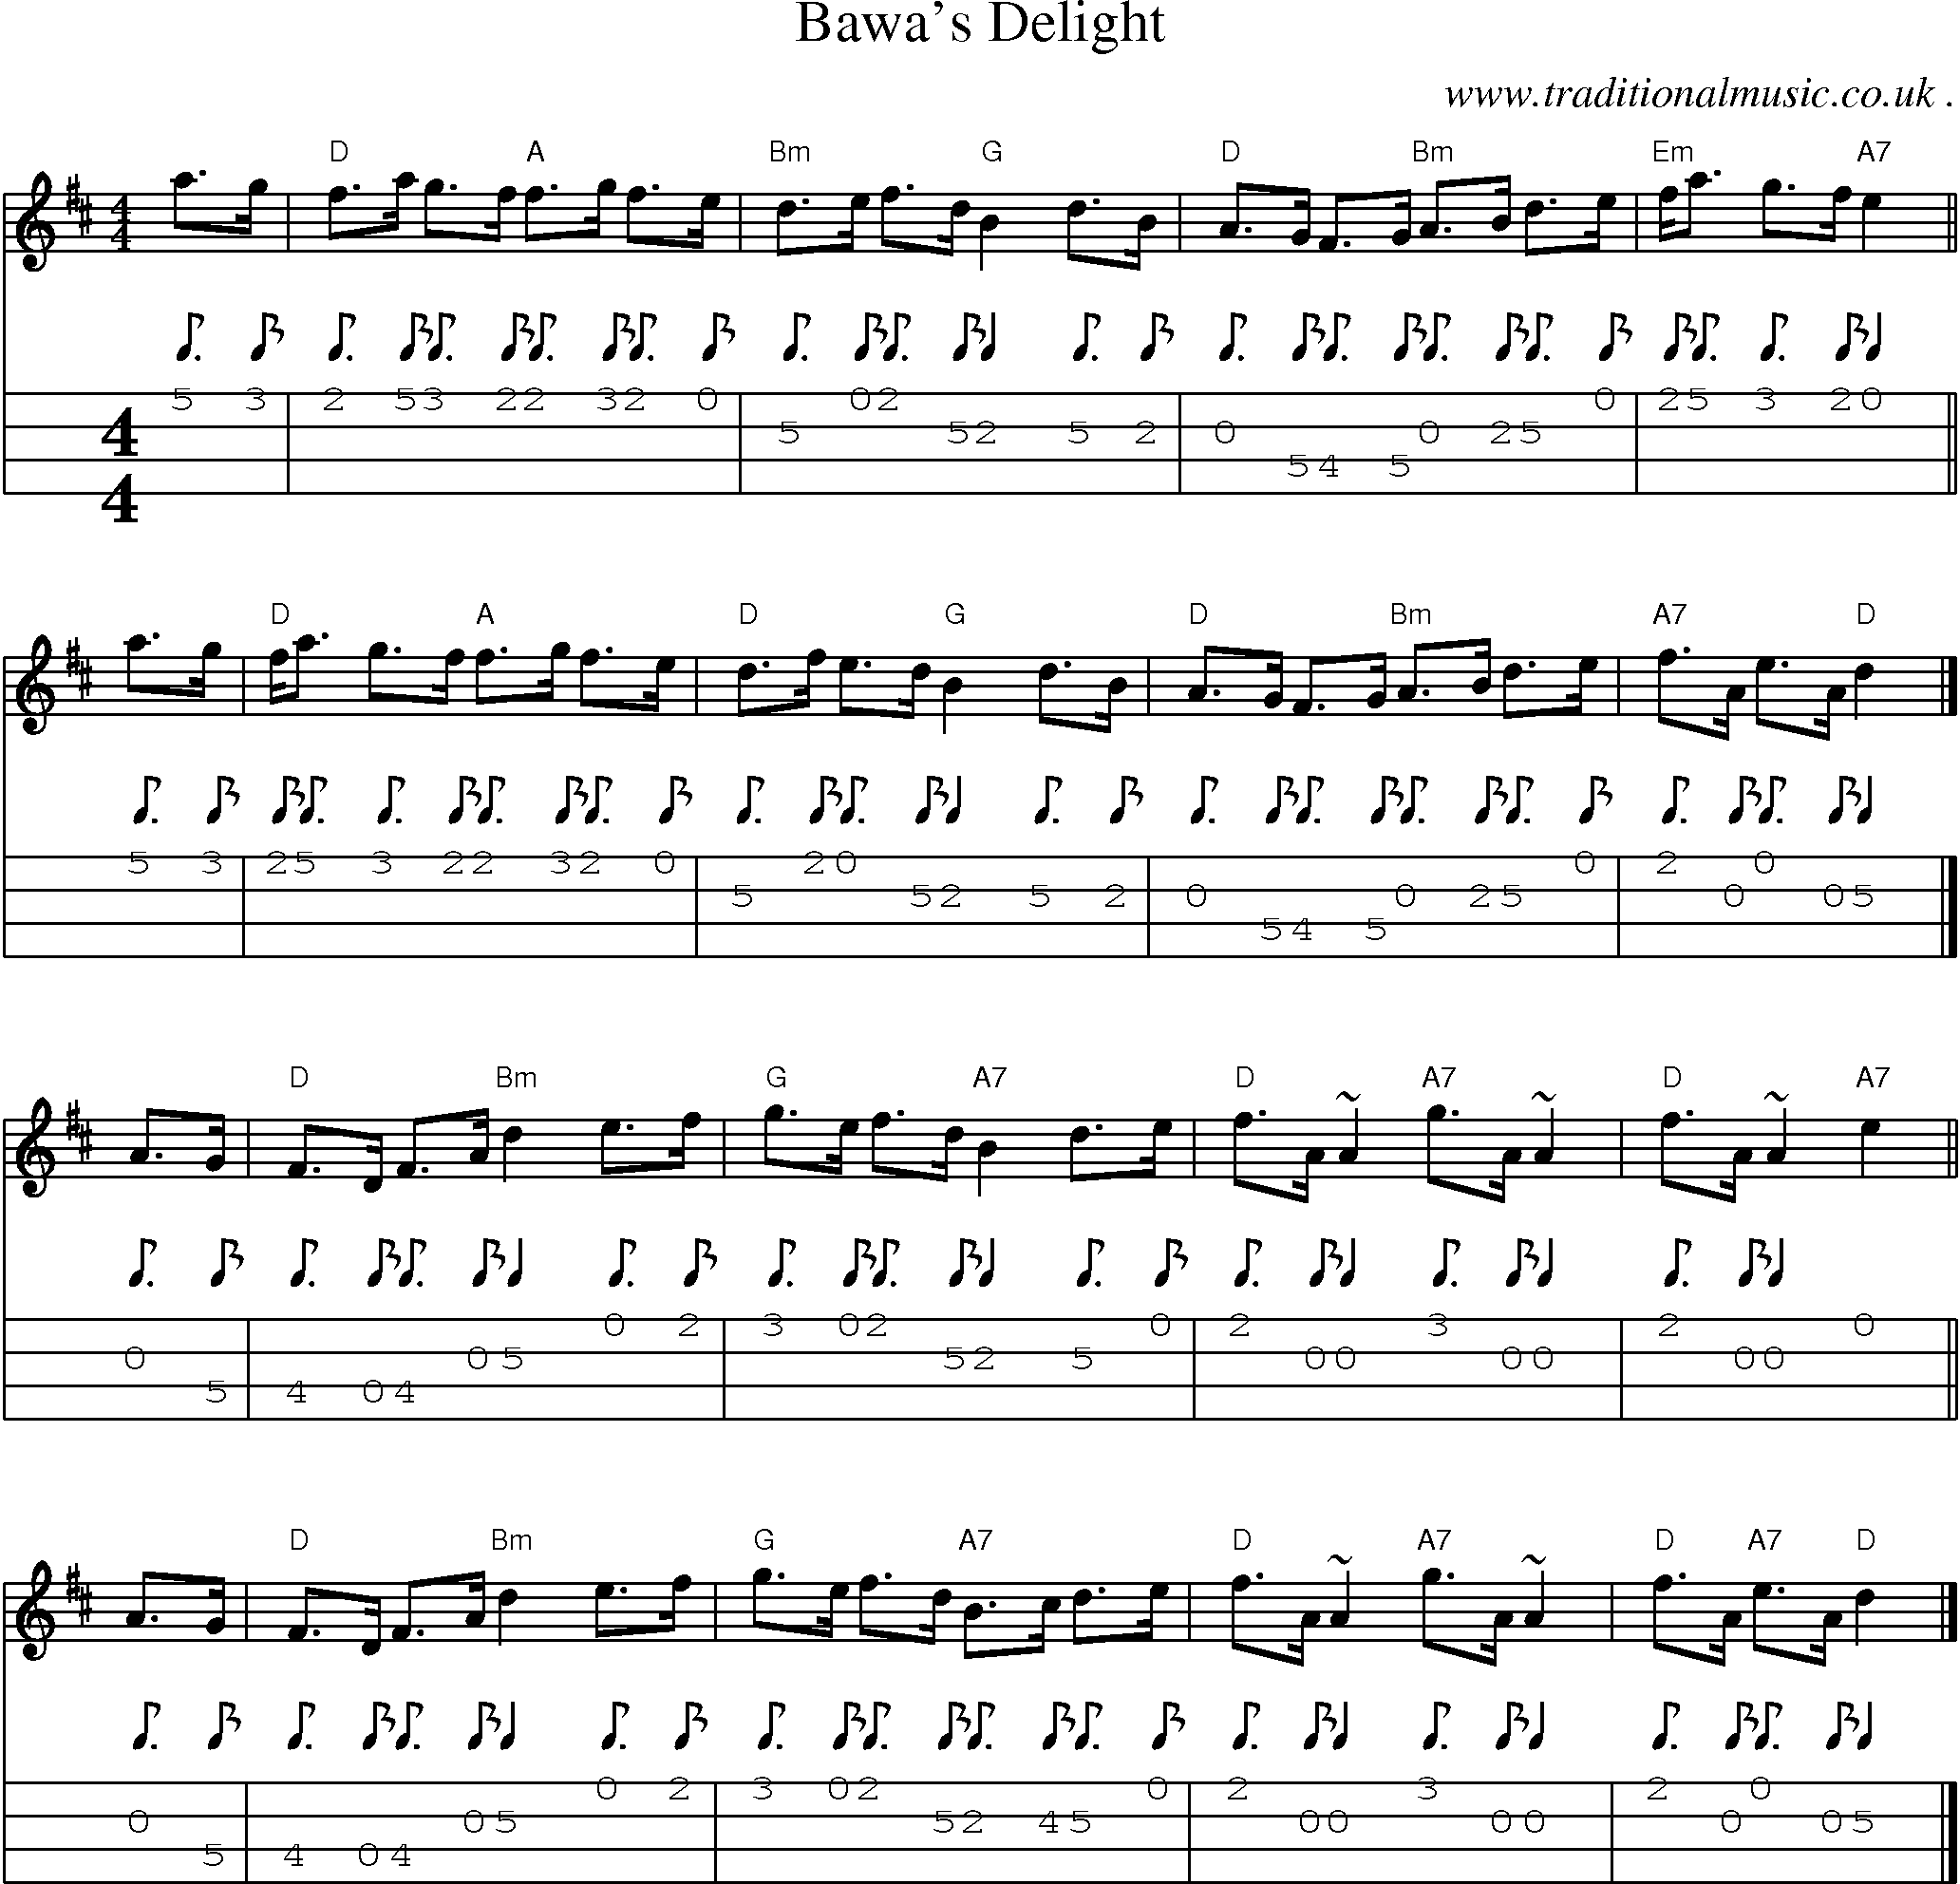 Sheet-music  score, Chords and Mandolin Tabs for Bawas Delight